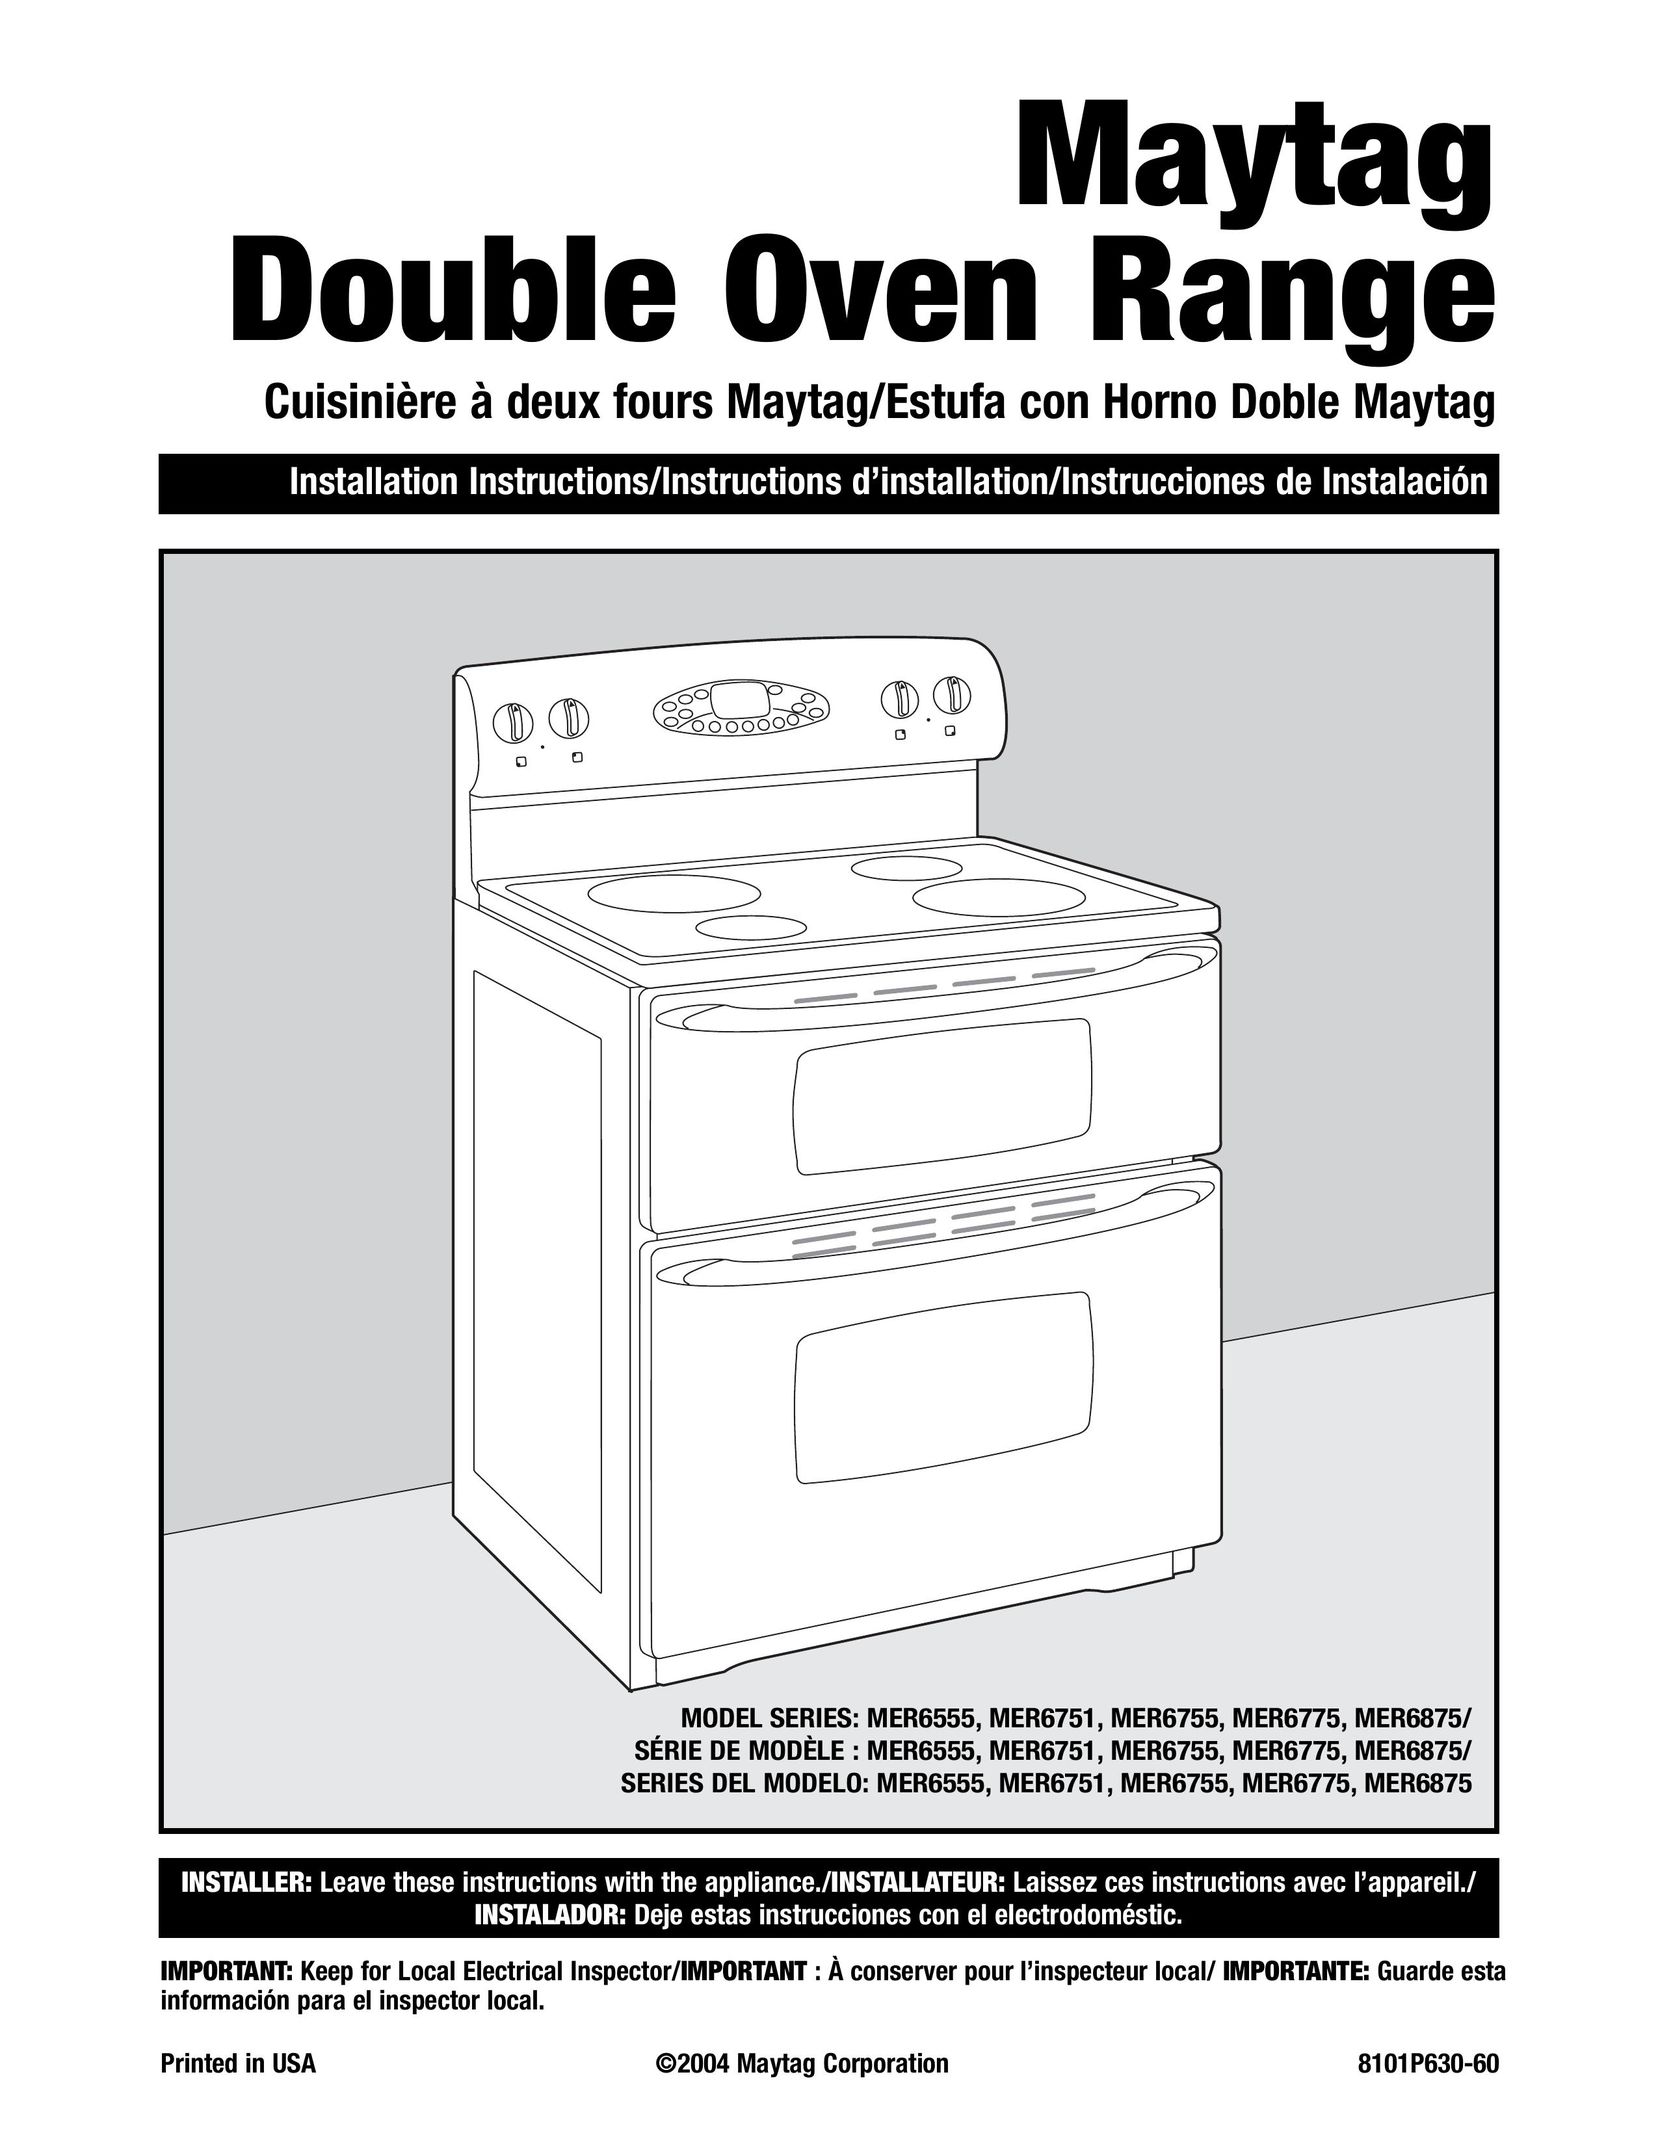 Maytag MER6775 Double Oven User Manual